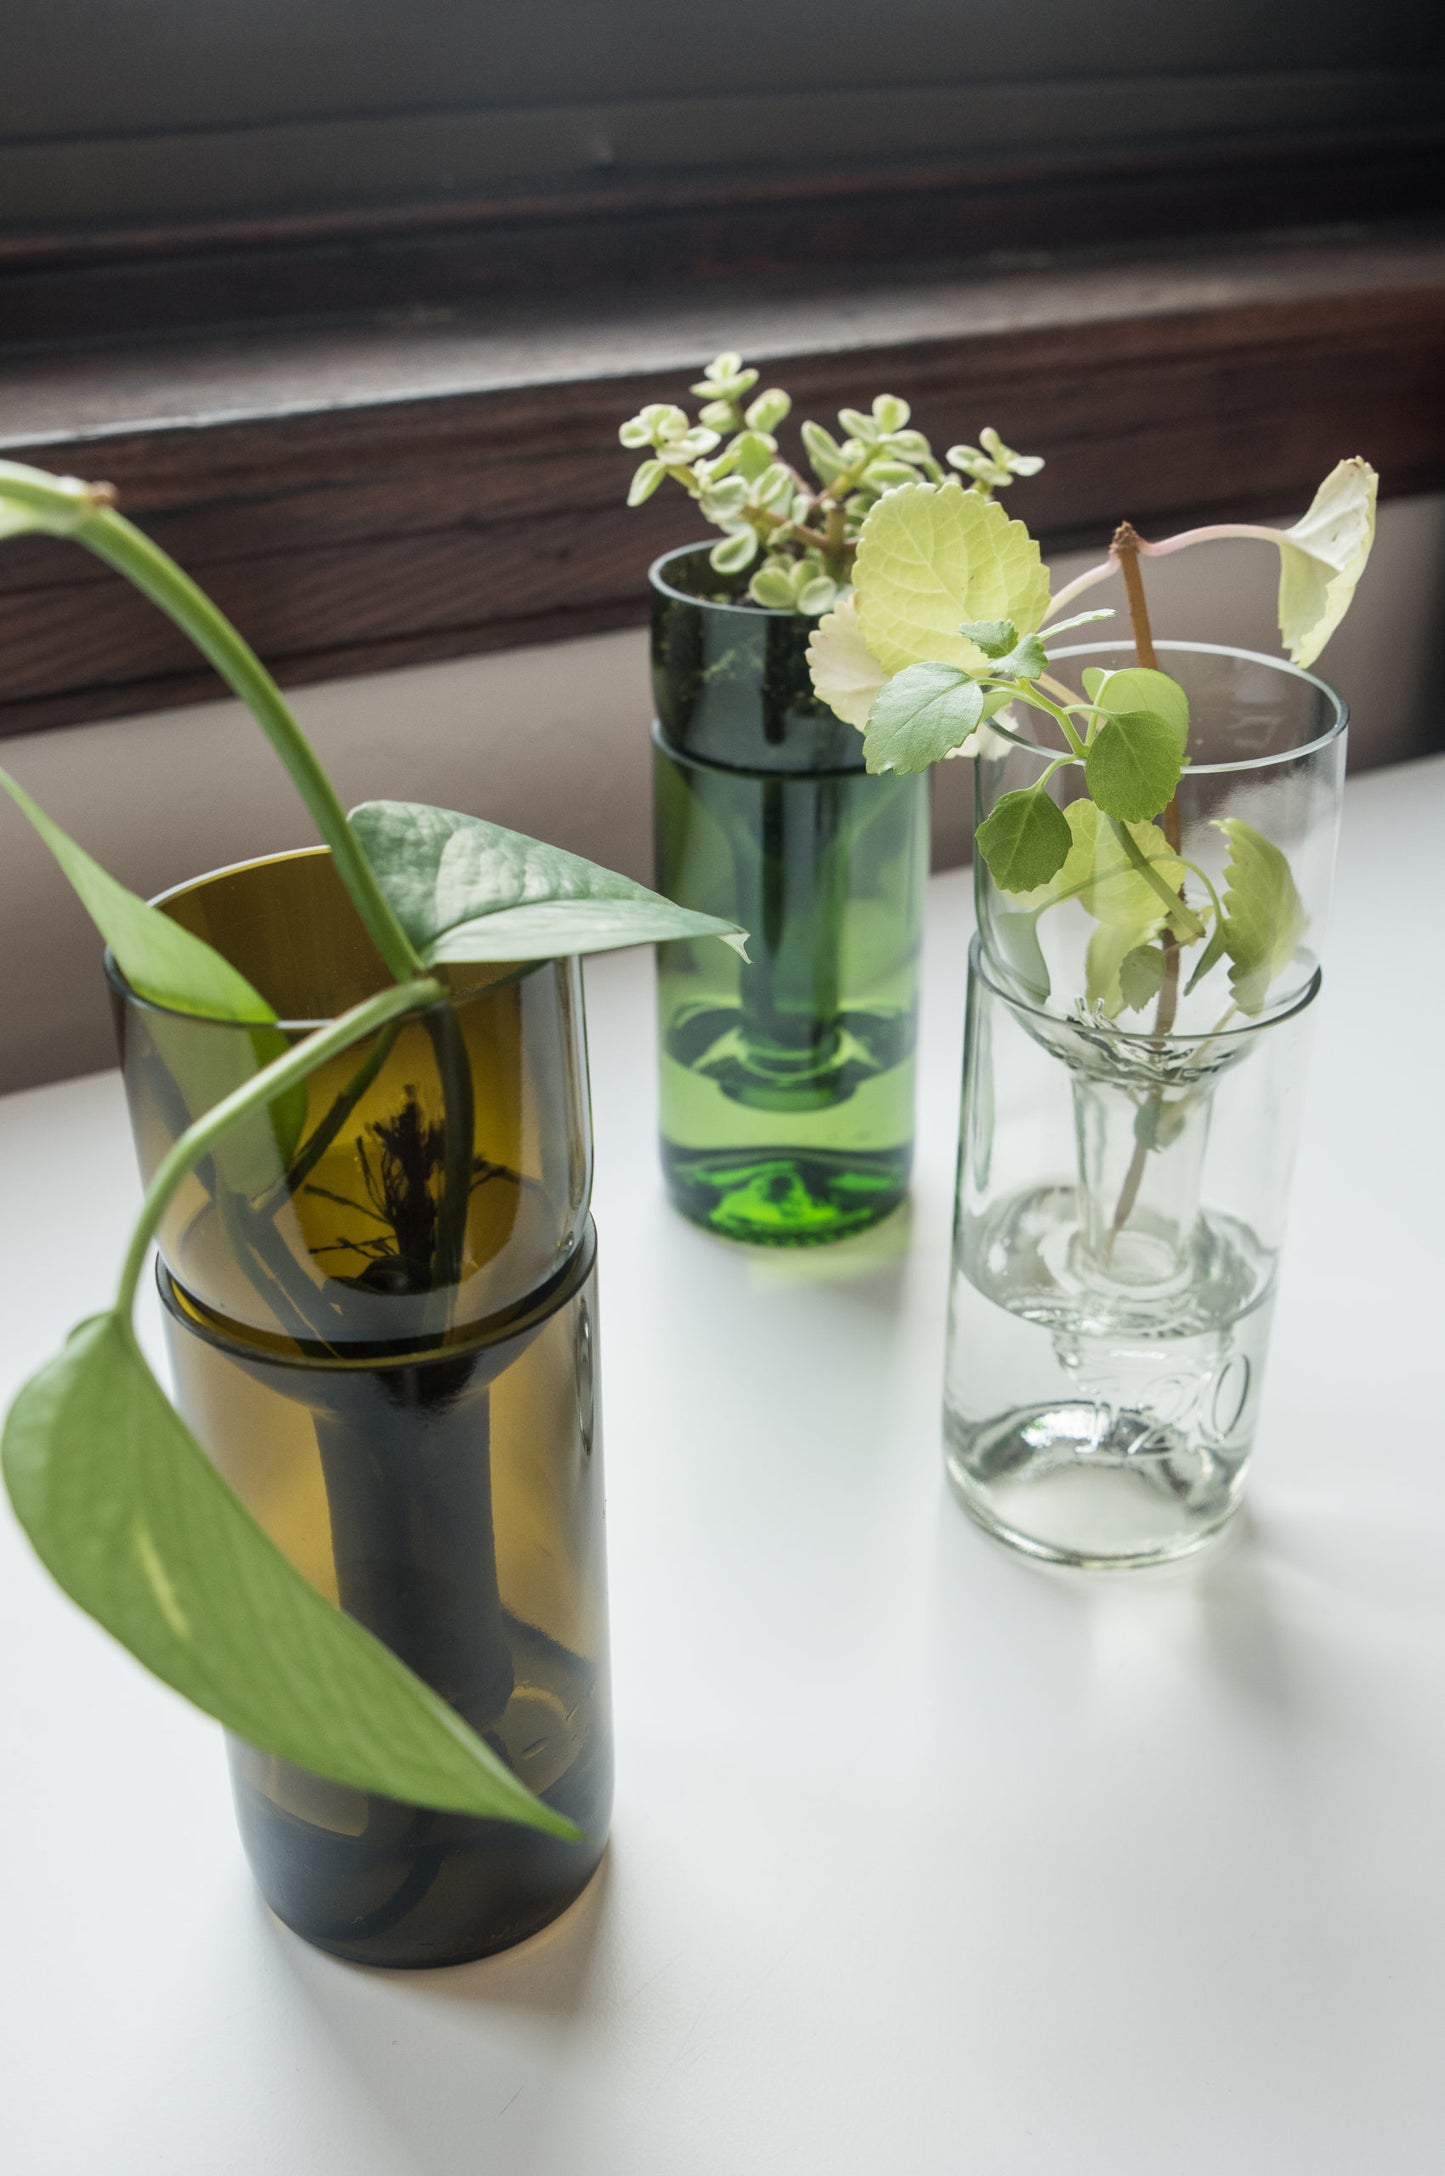 amber, emerald, and clear self-watering planters made from recycled glass